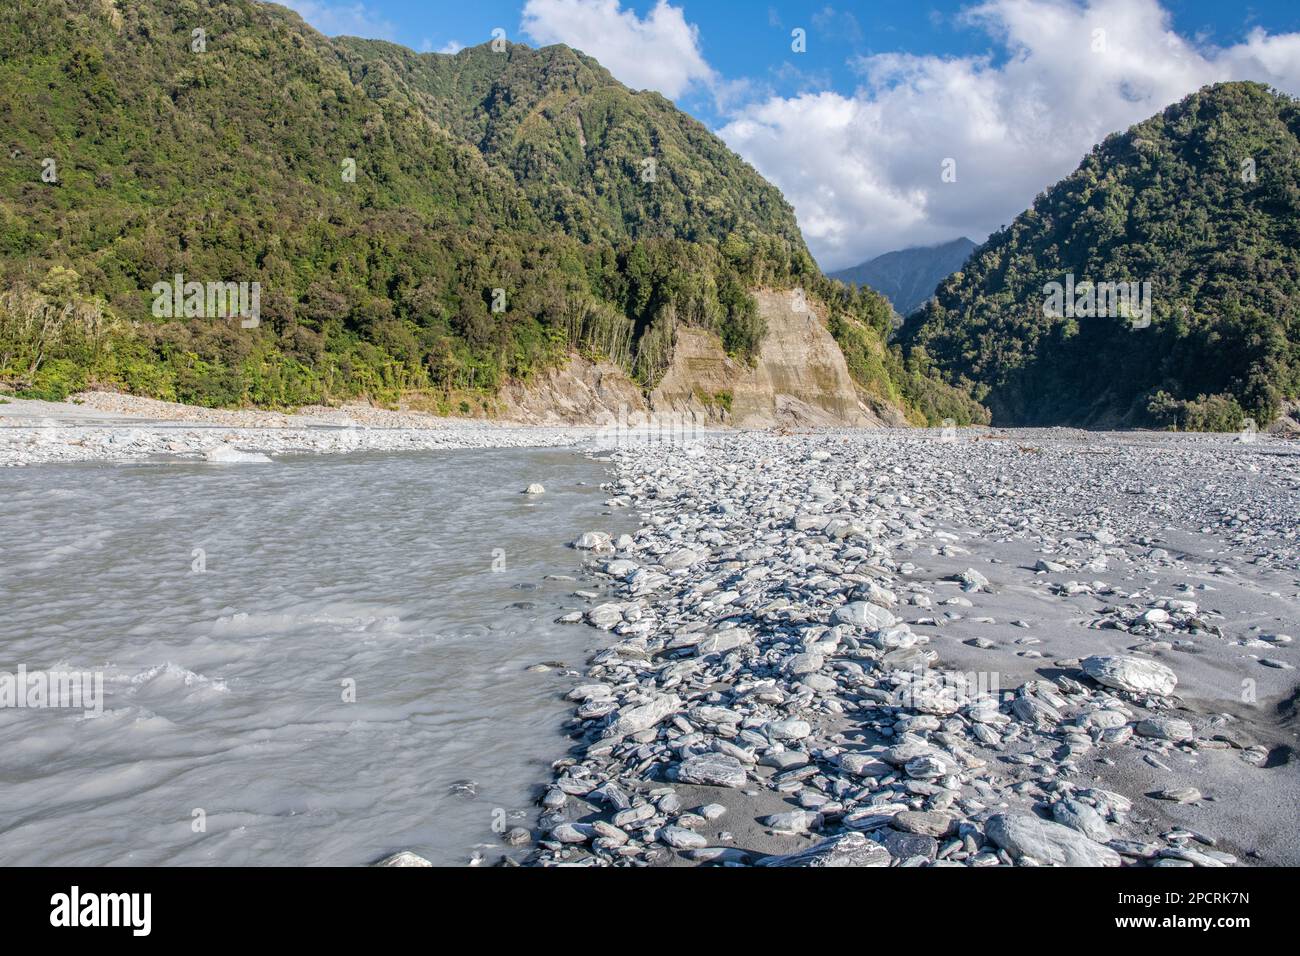 The Waiho river full of glacial melt water flows out of the hilly landscape in the South island of Aotearoa New Zealand. Stock Photo